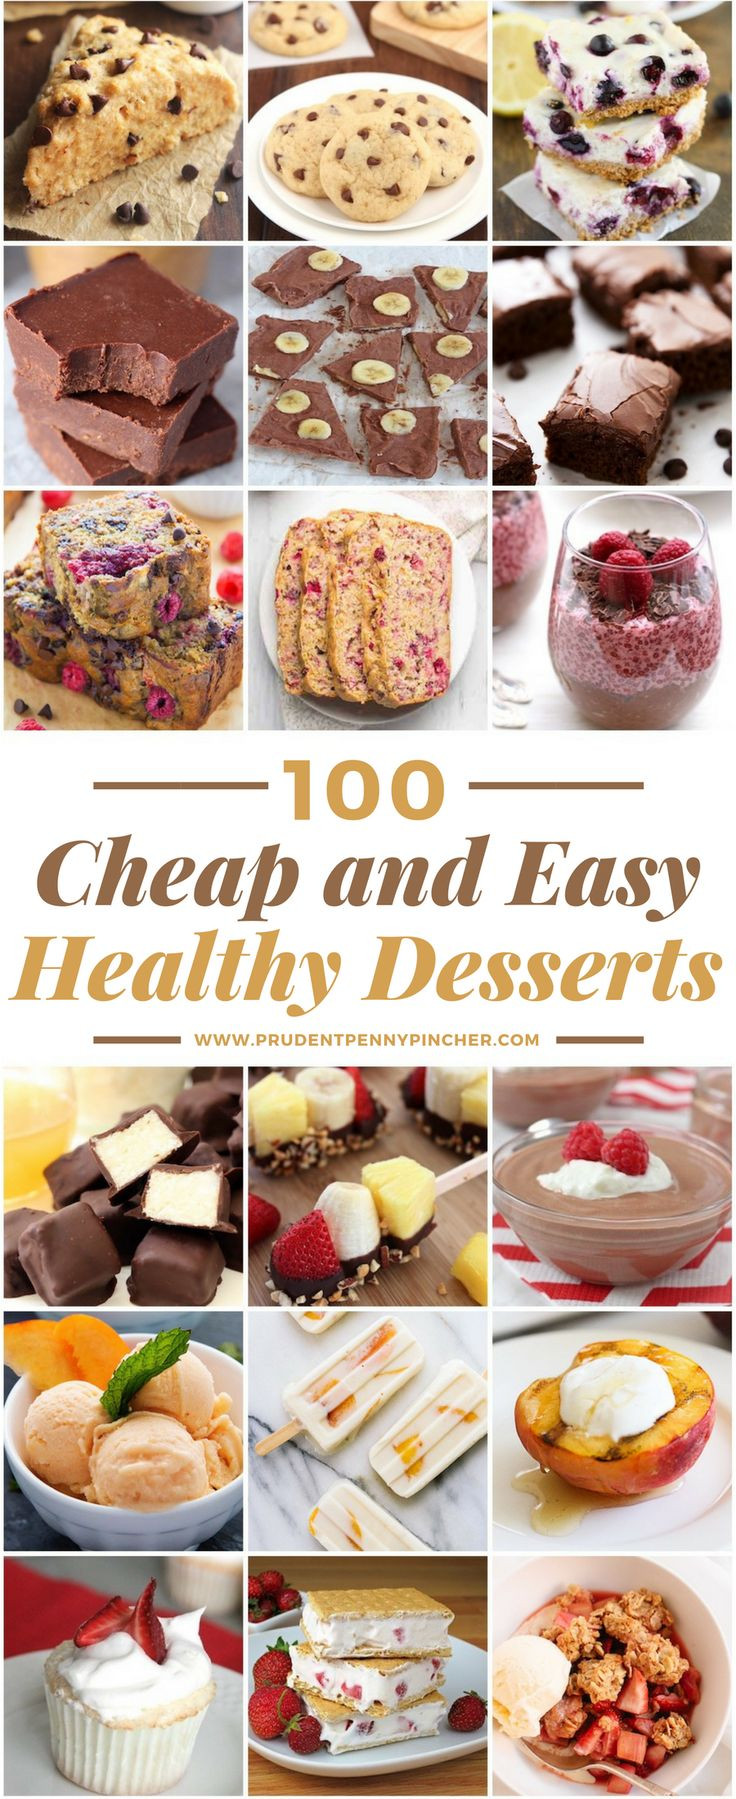 Cheap And Easy Desserts
 Best 25 Easy cheap desserts ideas on Pinterest